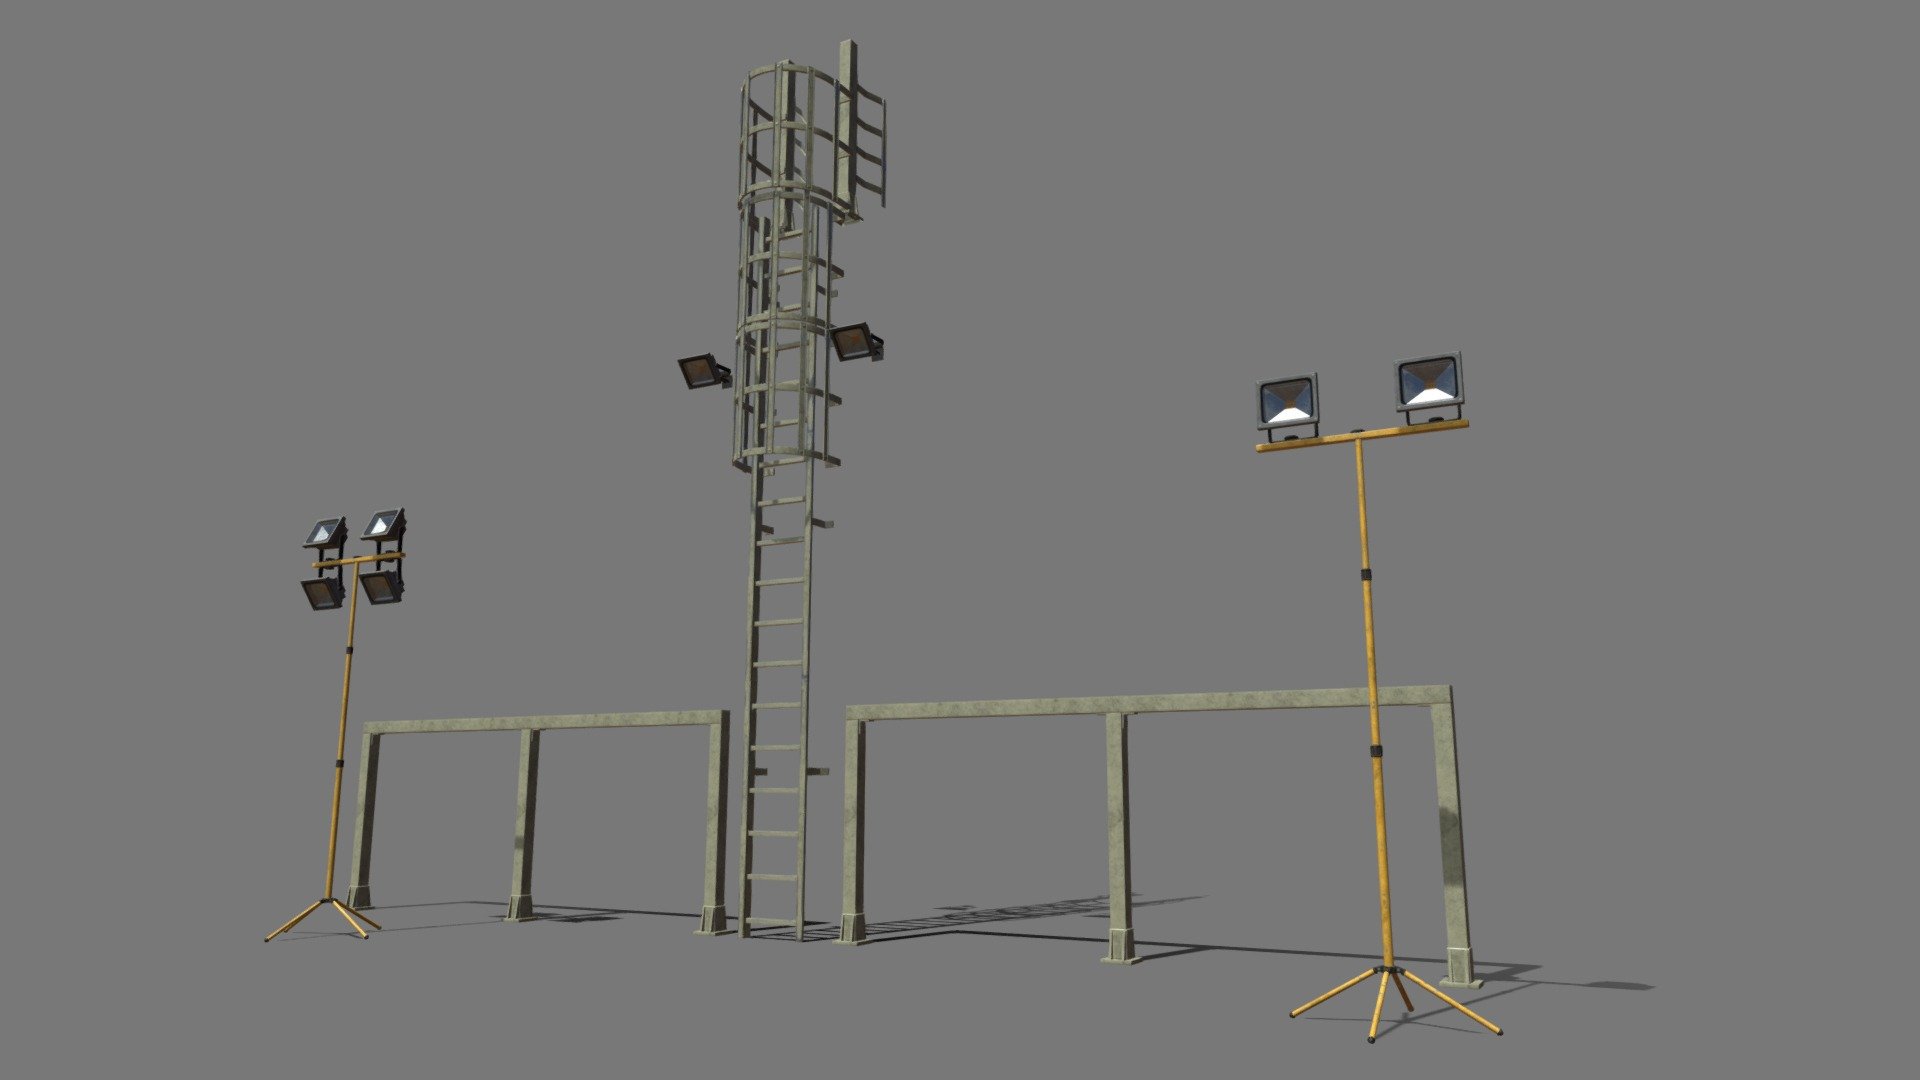 Here is a building kit for some worksite wall ladders and railings as well as some floodlight I created as part of my final major university game project called Carnage.

This version is to demonstrate how they are set up, there is another version that just shows the kit components 3d model